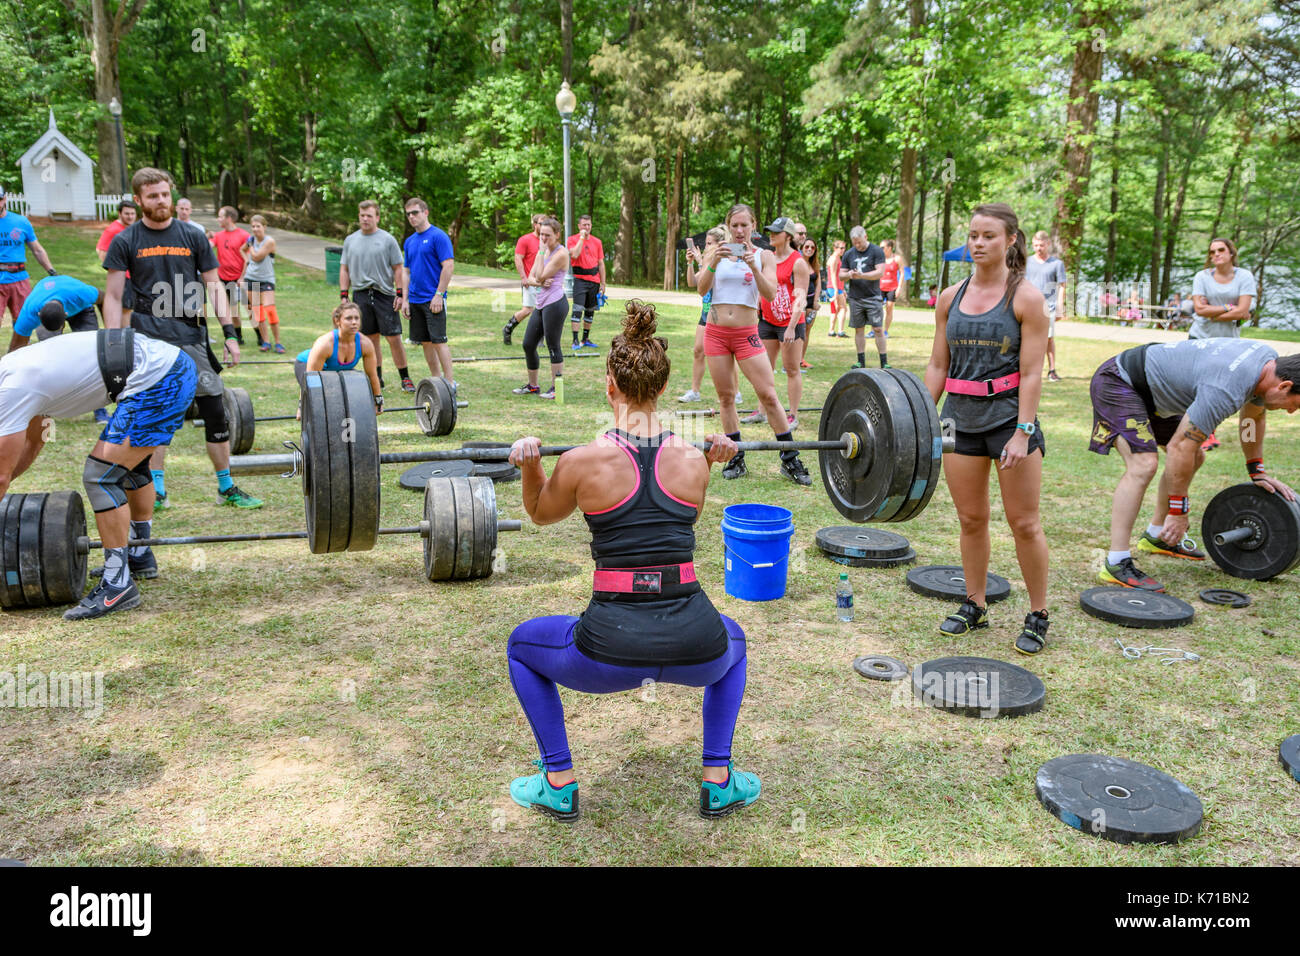 Woman competing in the Combat on the Coosa fitness challenge in Wetumpka, Alabama, United States, lifting heavy weights. Stock Photo